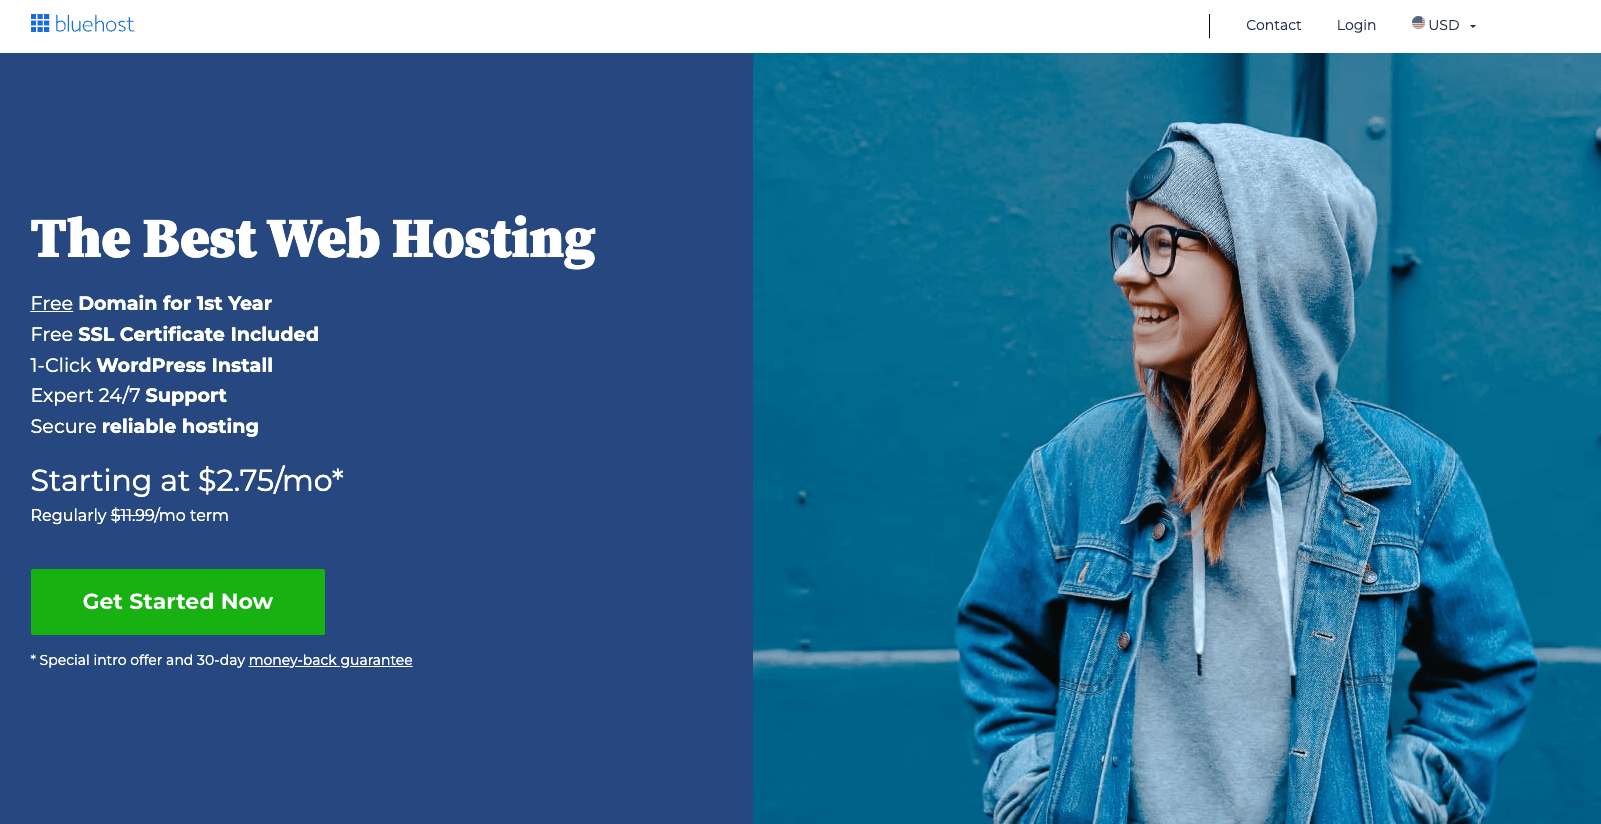 One of the best shared hosting companies is Bluehost.